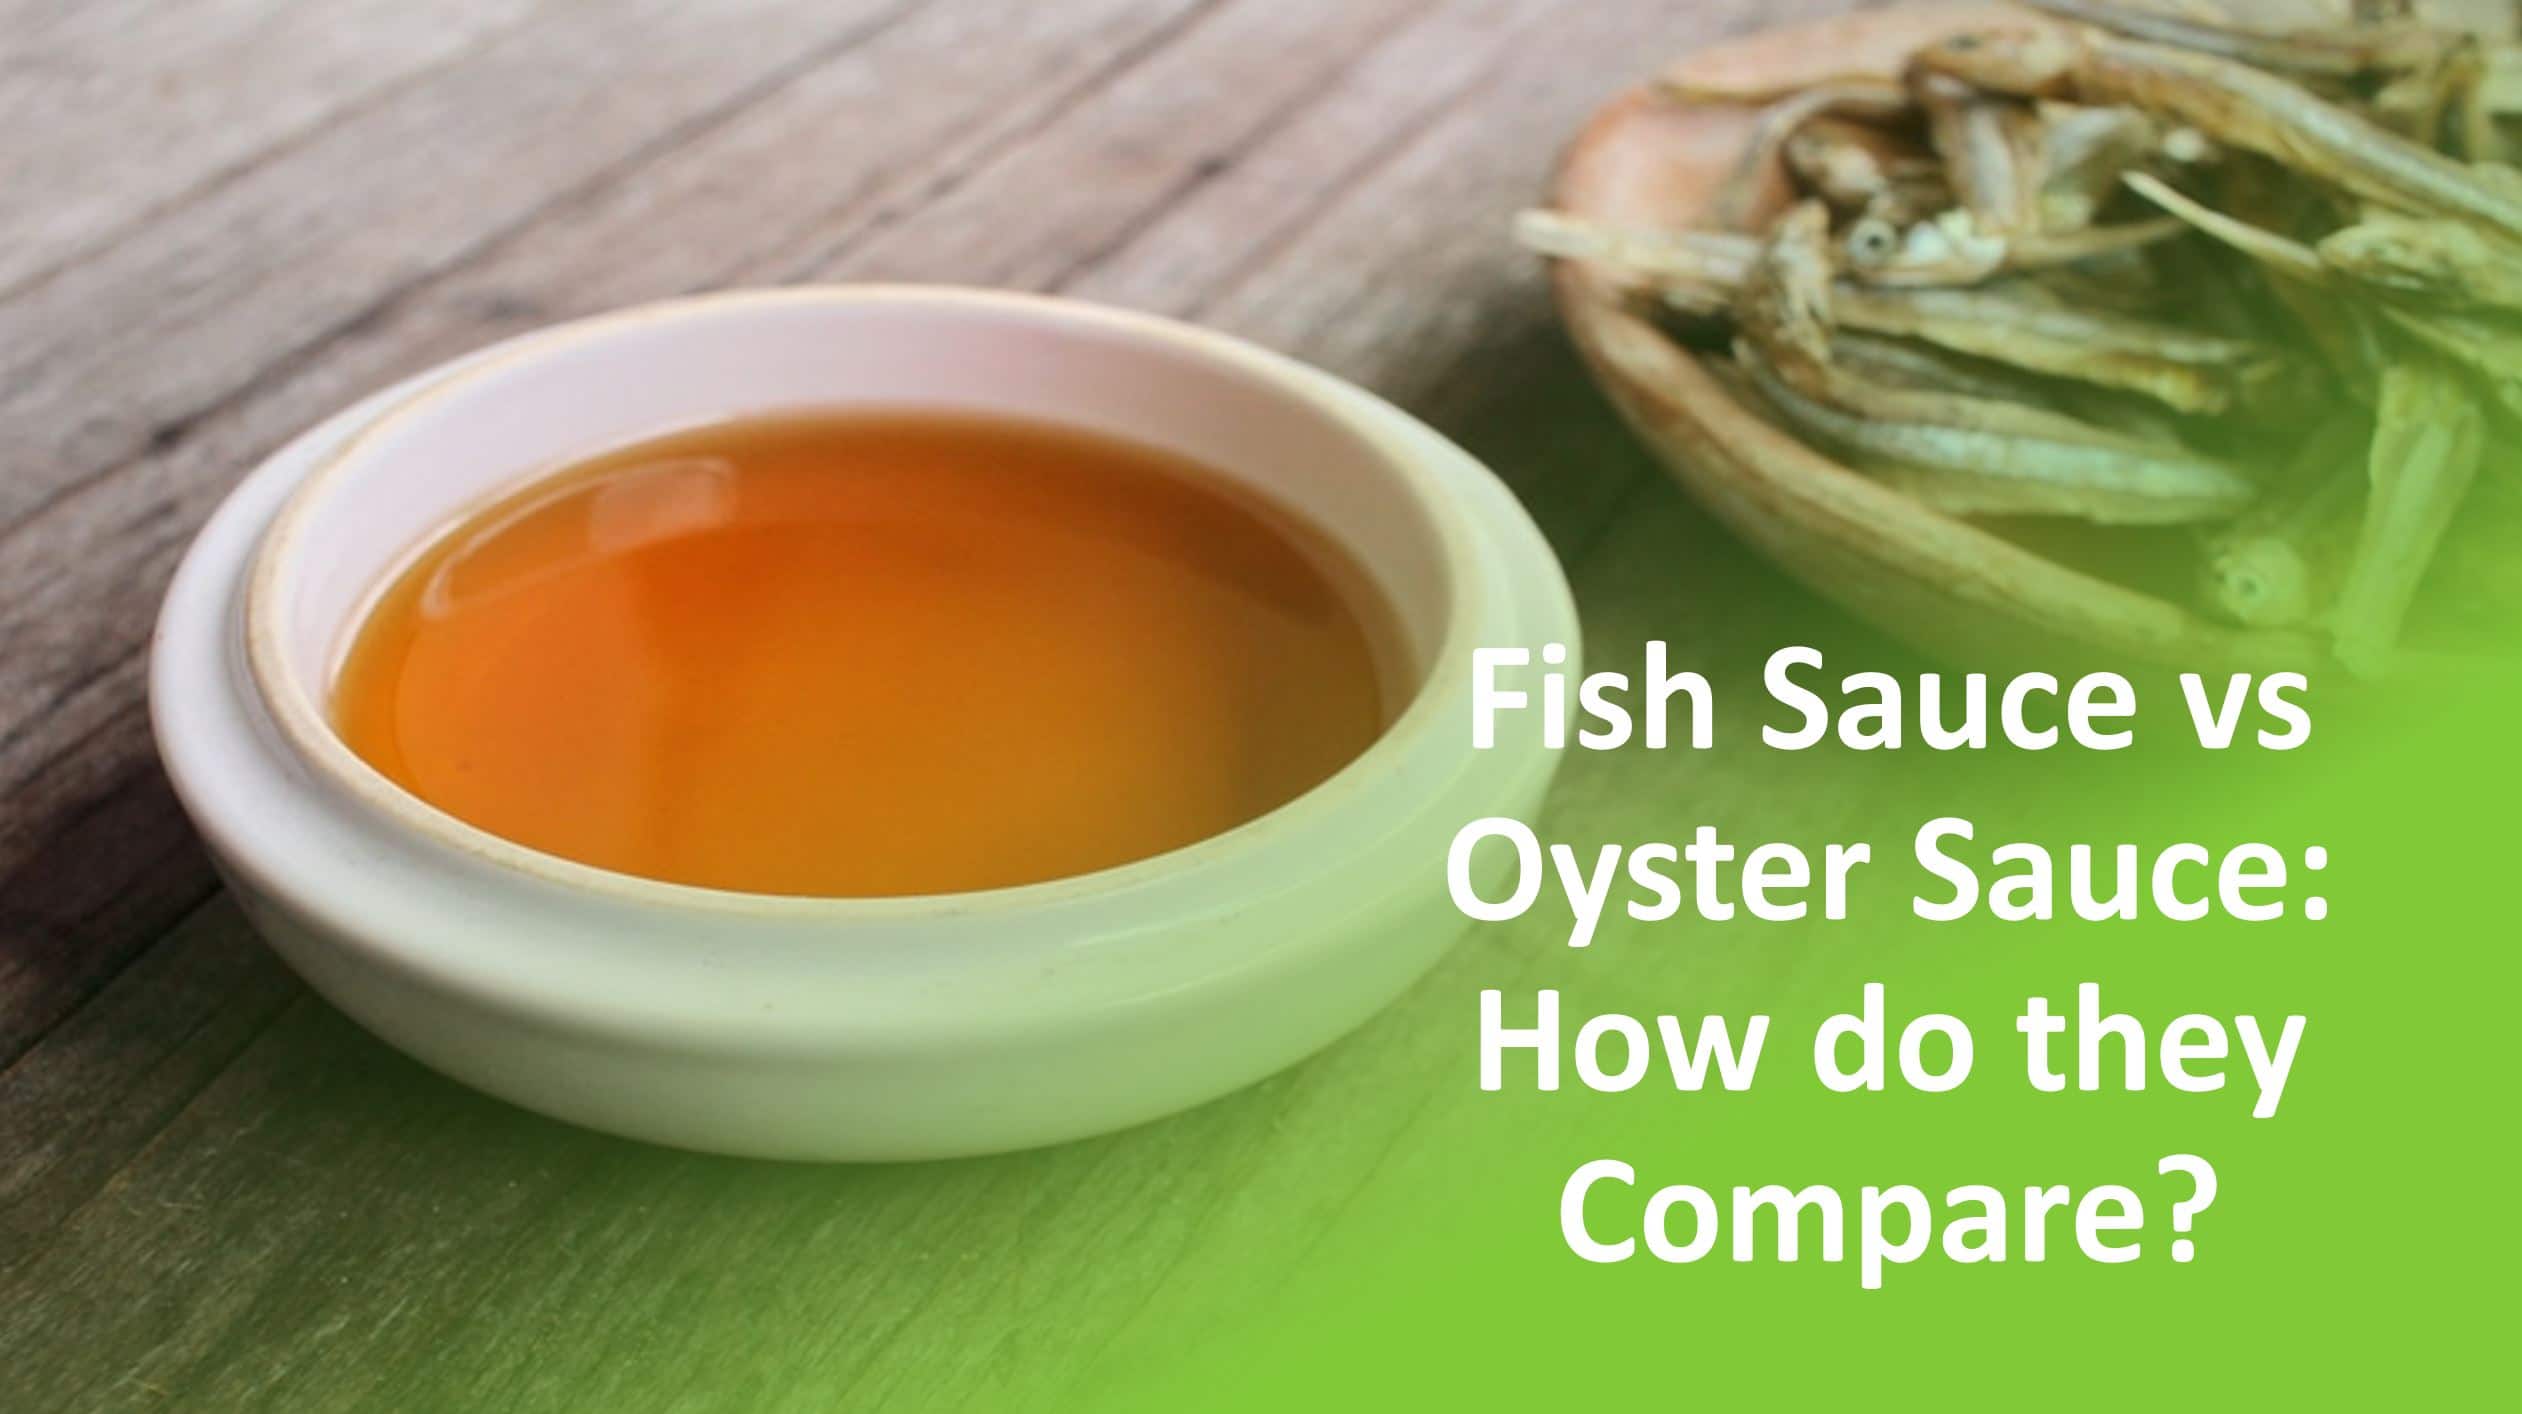 Fish Sauce vs Oyster Sauce: How Do They Compare?